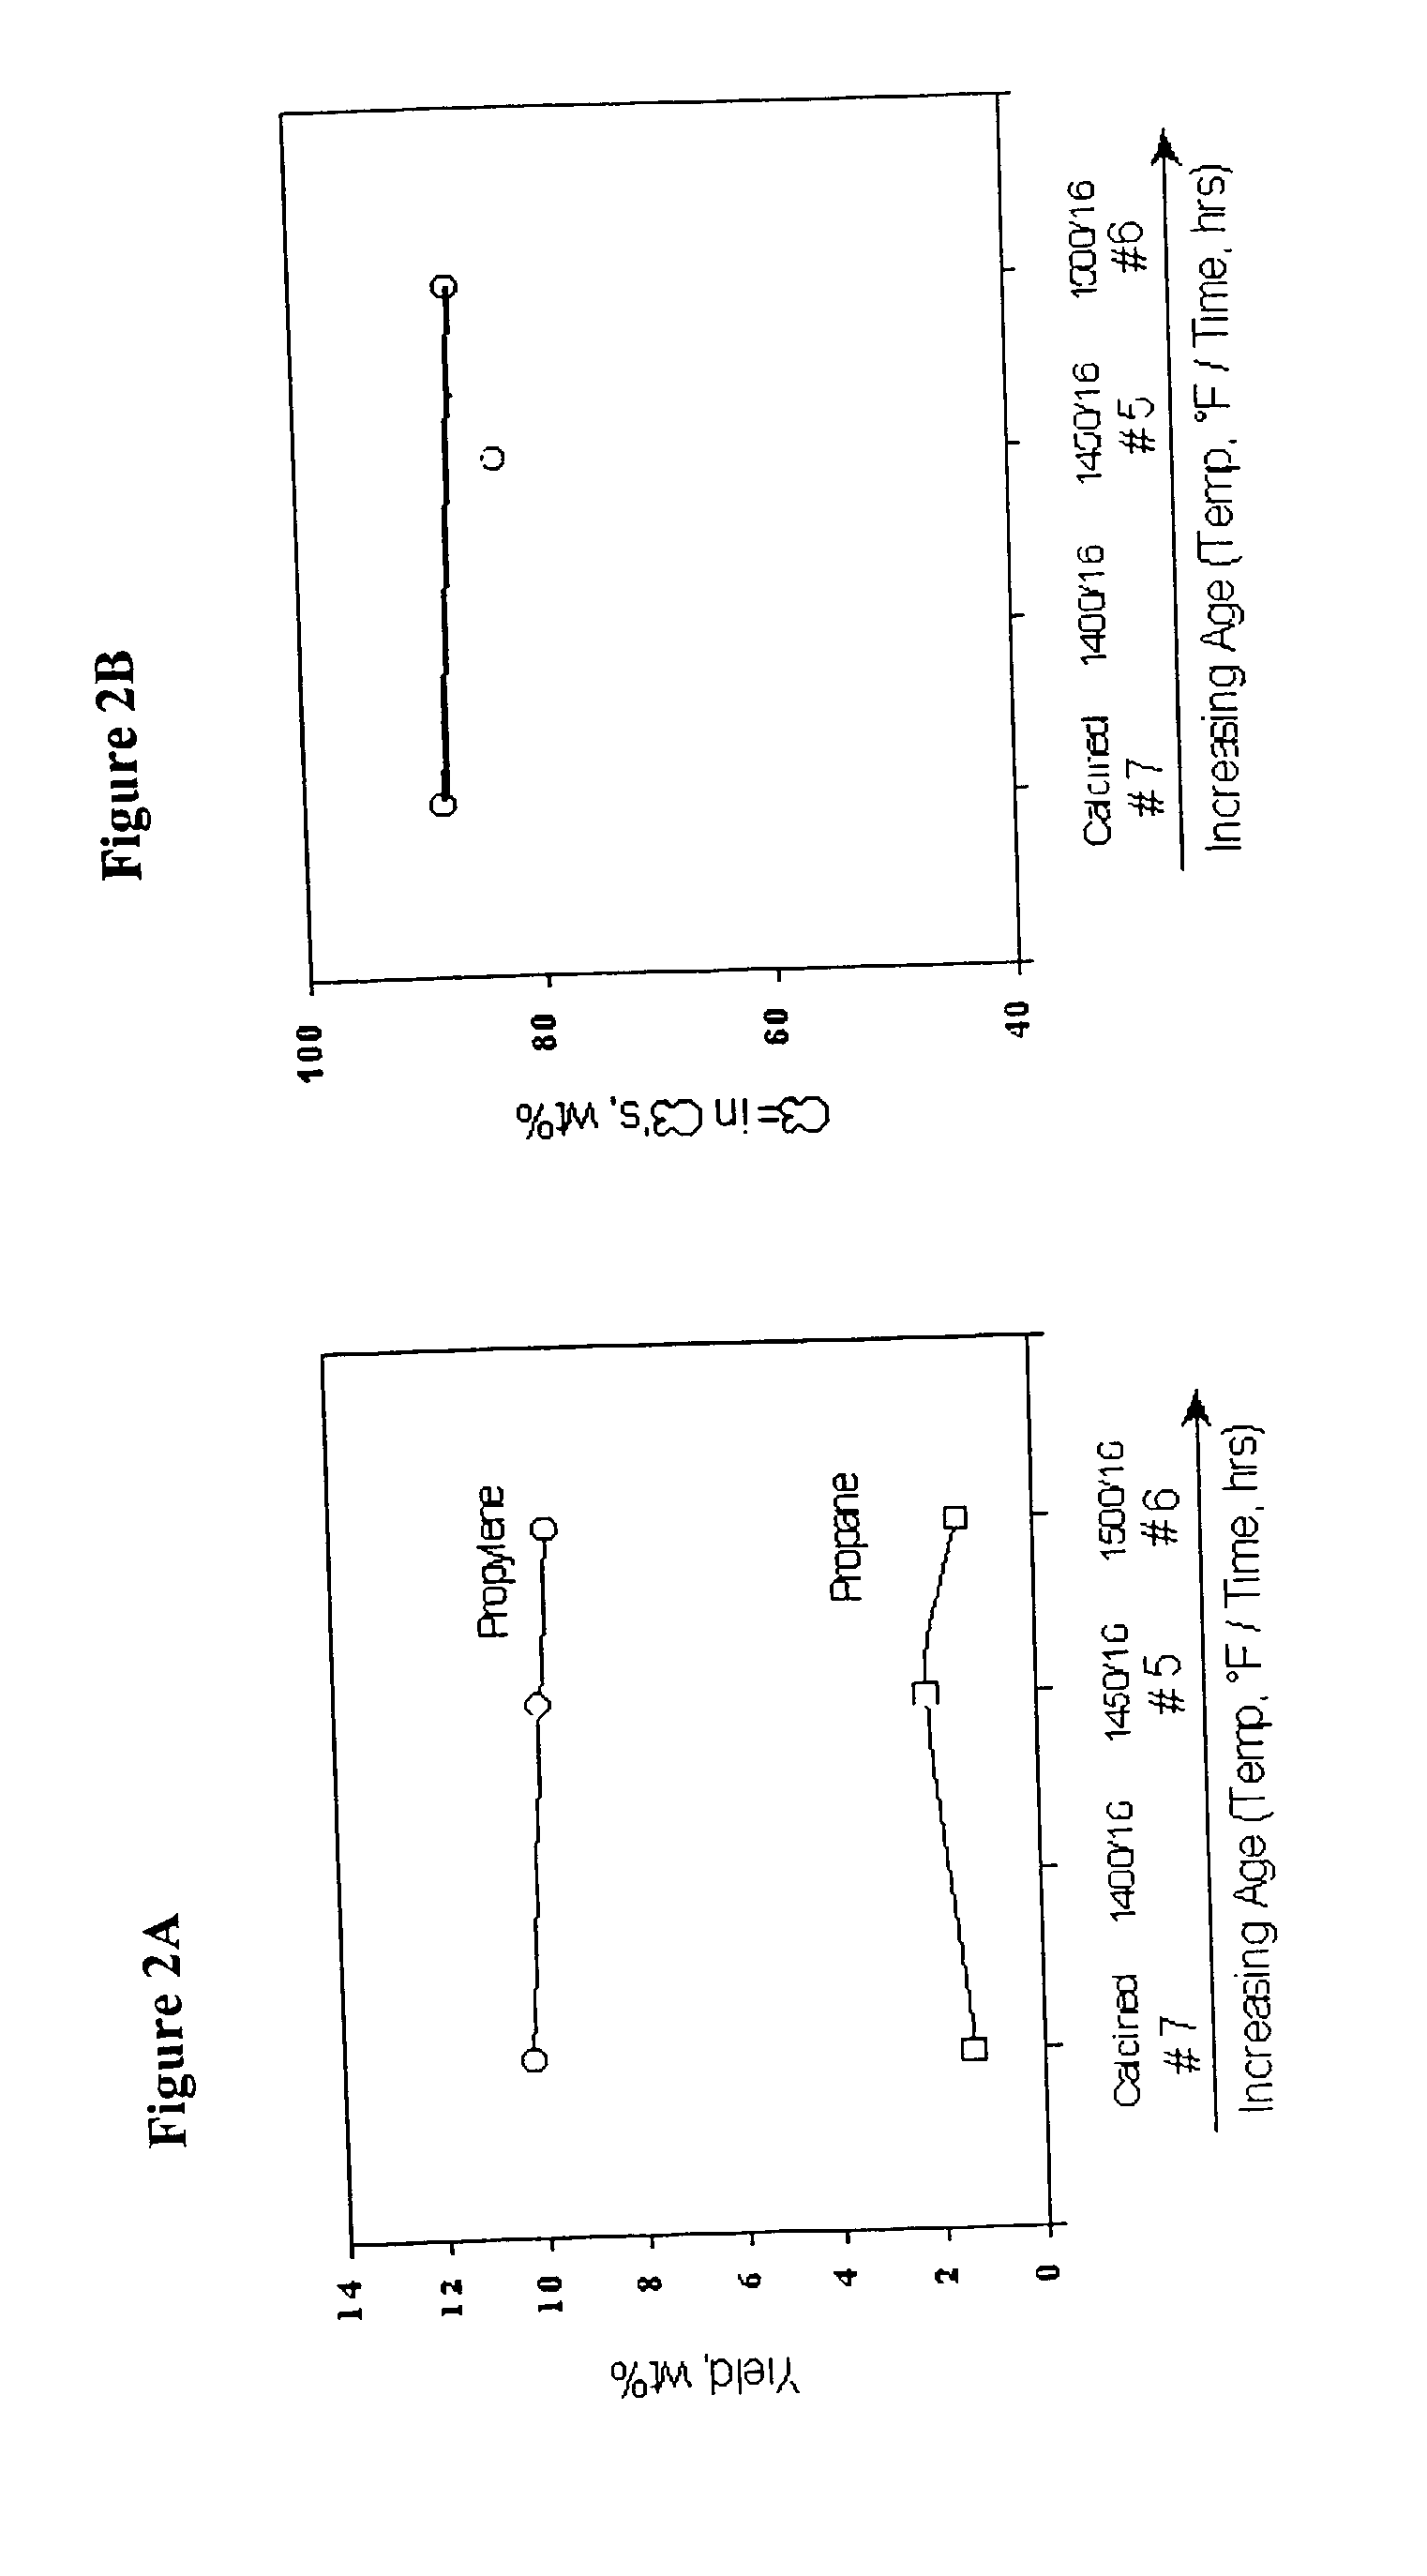 Process for selectively producing light olefins